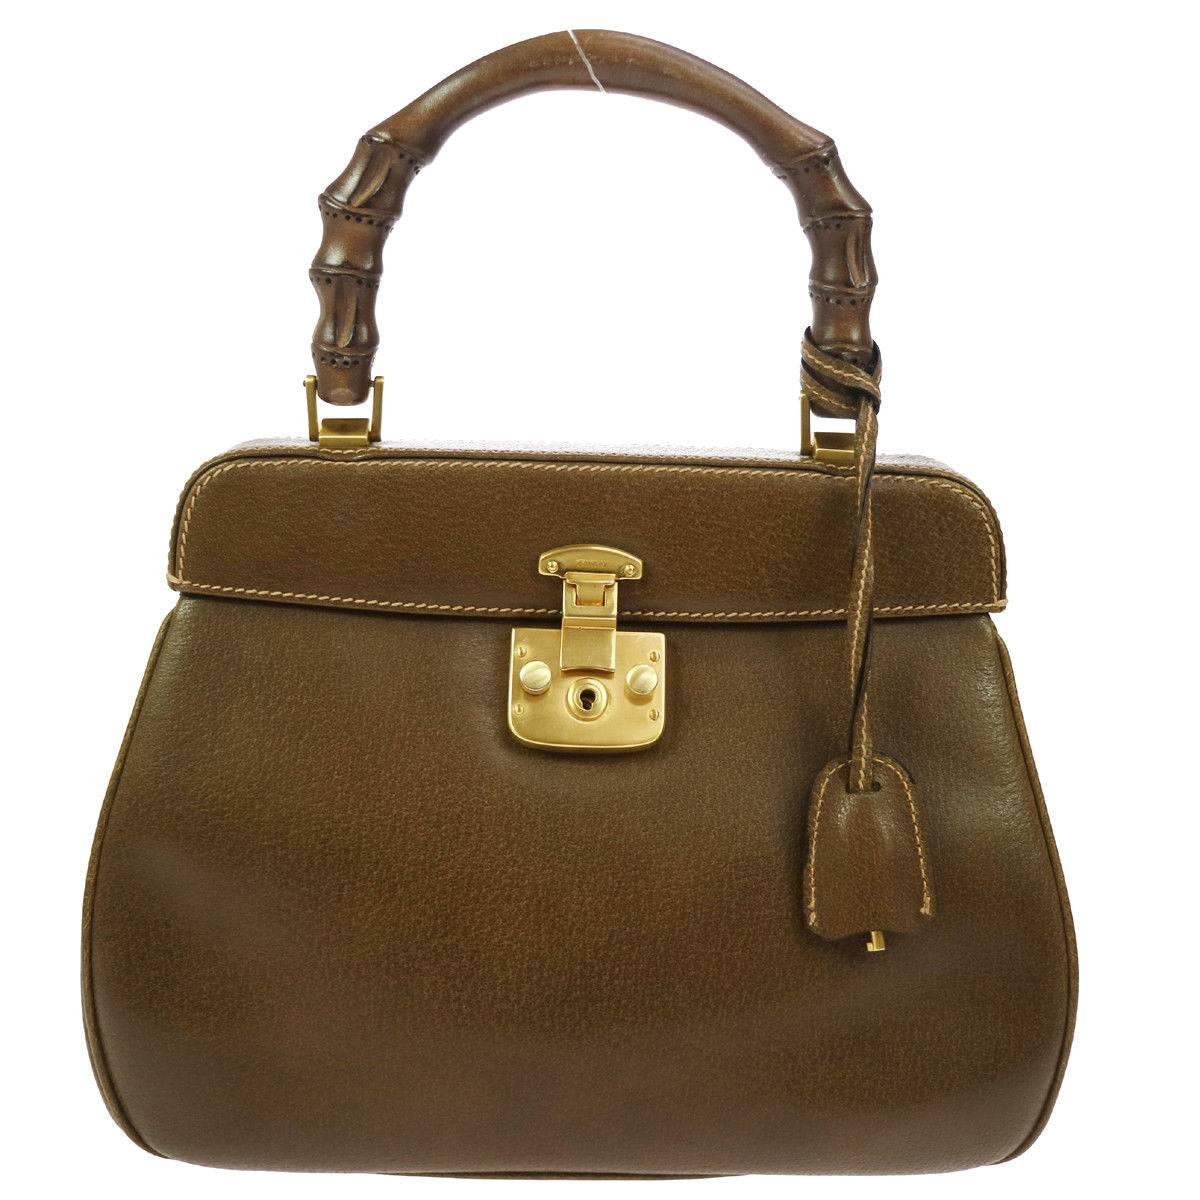 Gucci Cognac Leather Bamboo Top Handle Kelly Shoulder Bag